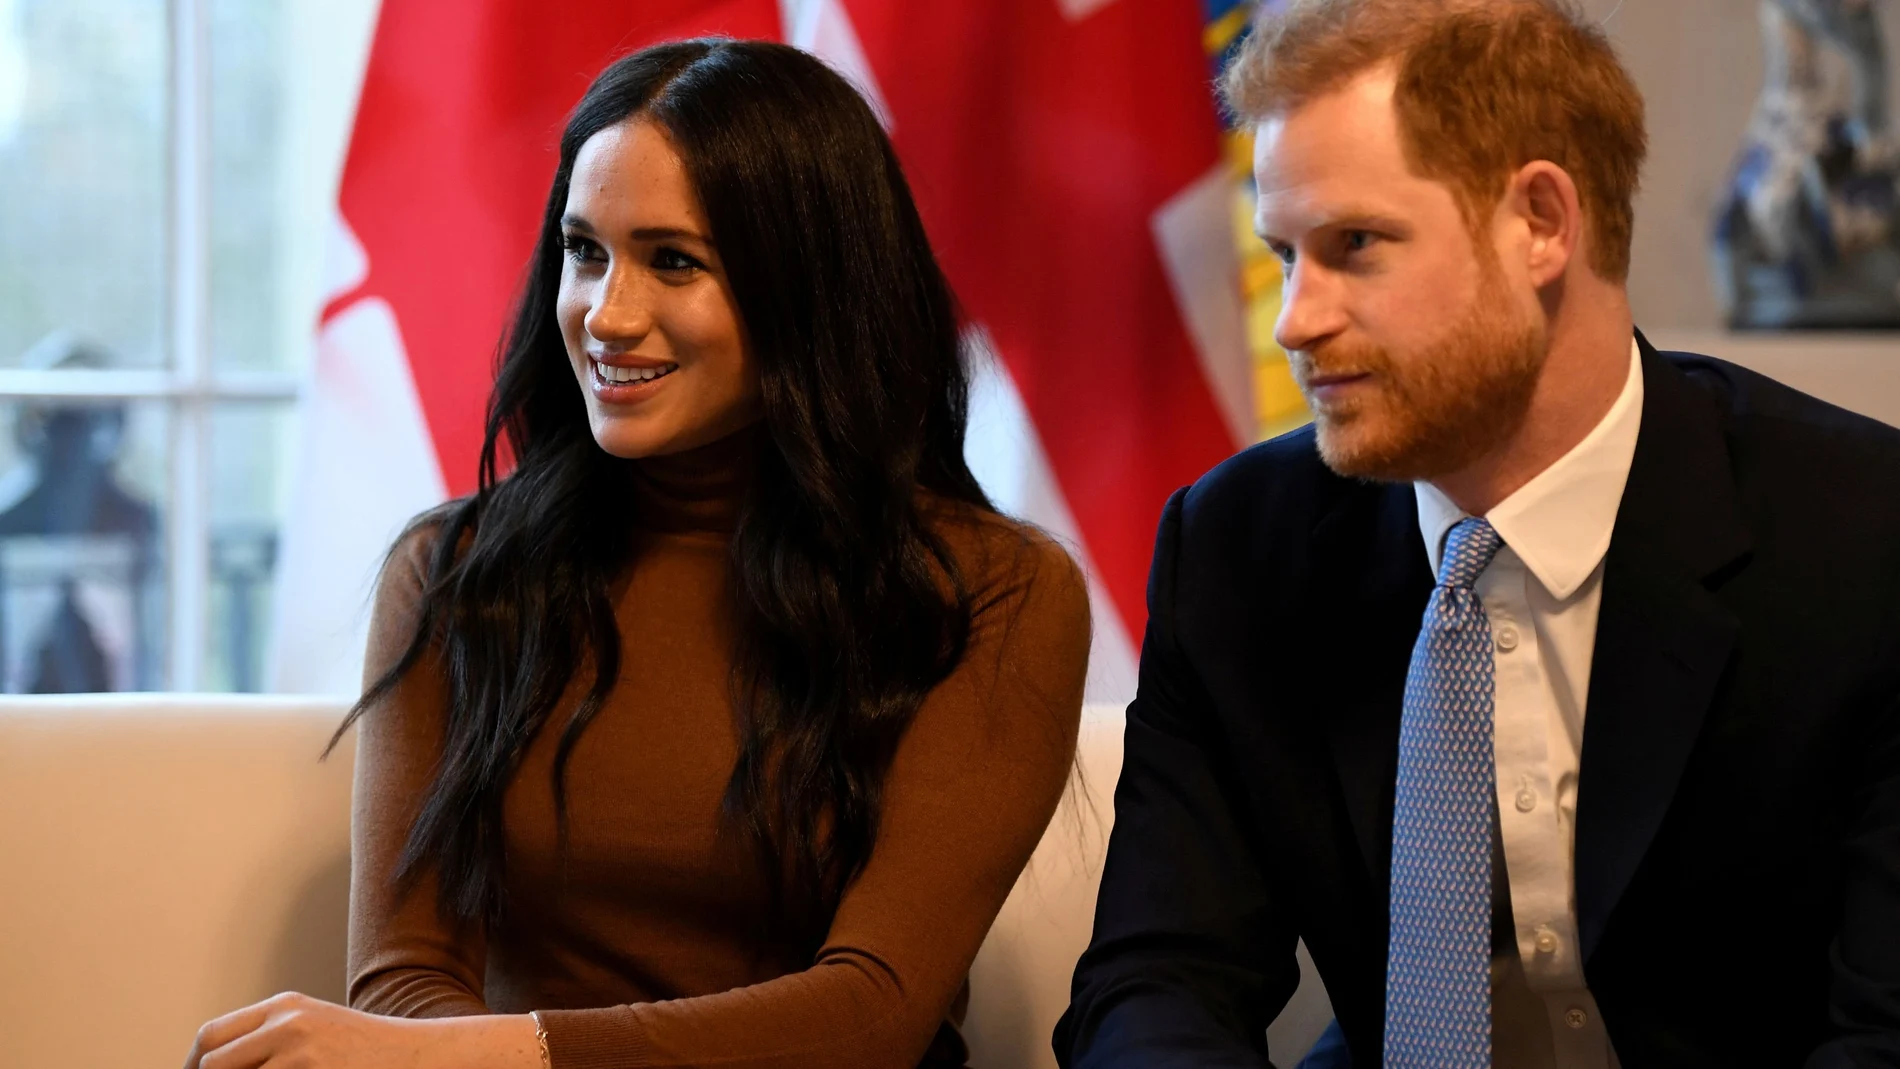 FILE PHOTO: The Duke and Duchess of Sussex visit Canada House